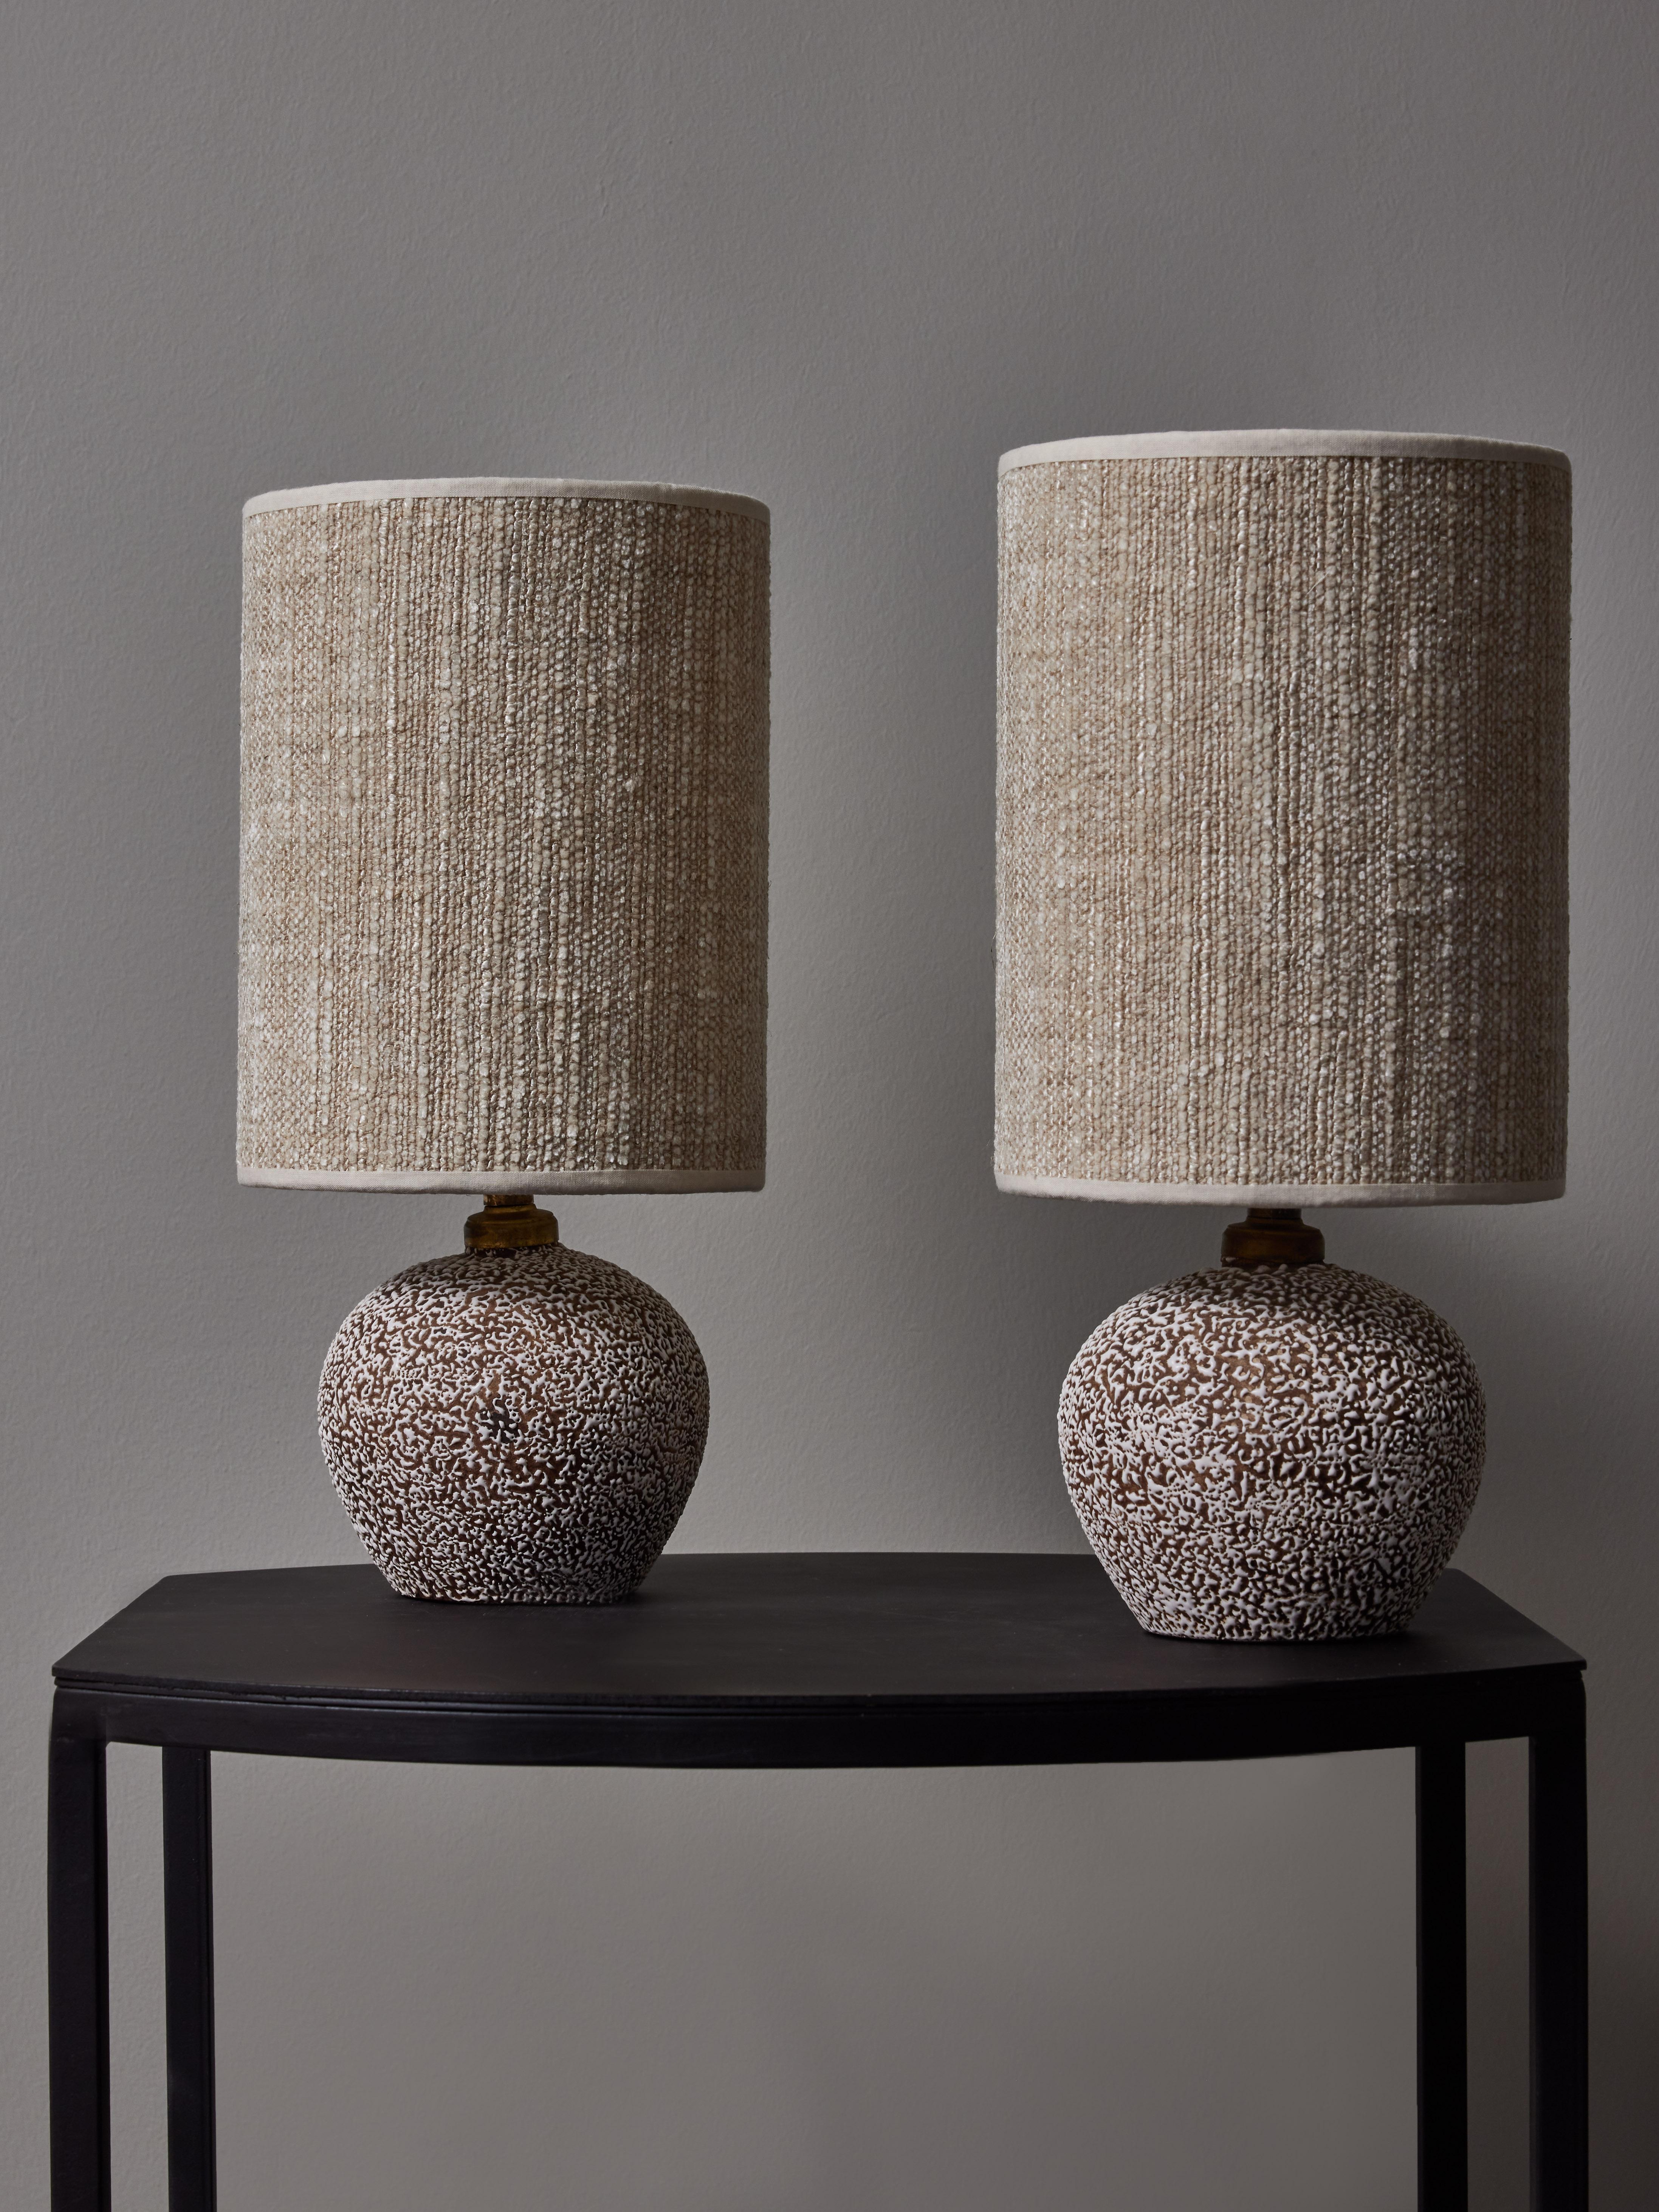 Small pair of round table lamps made of speckled ceramic topped with new shades.